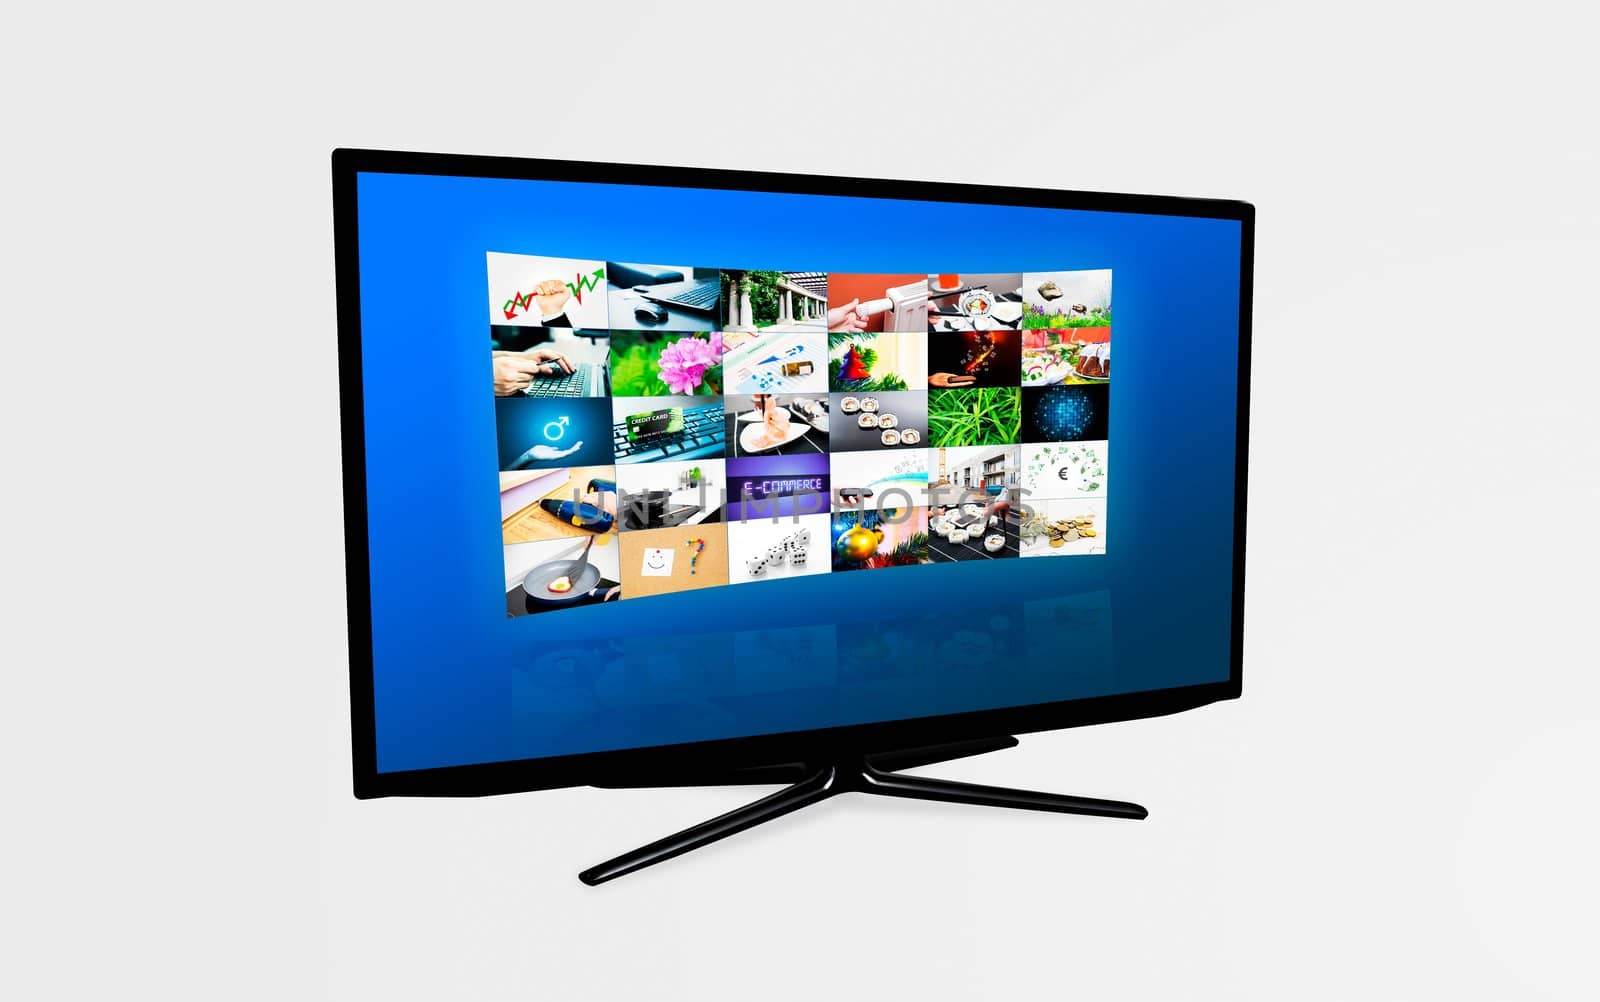 Widescreen high definition TV screen with video gallery. Television and internet concept.